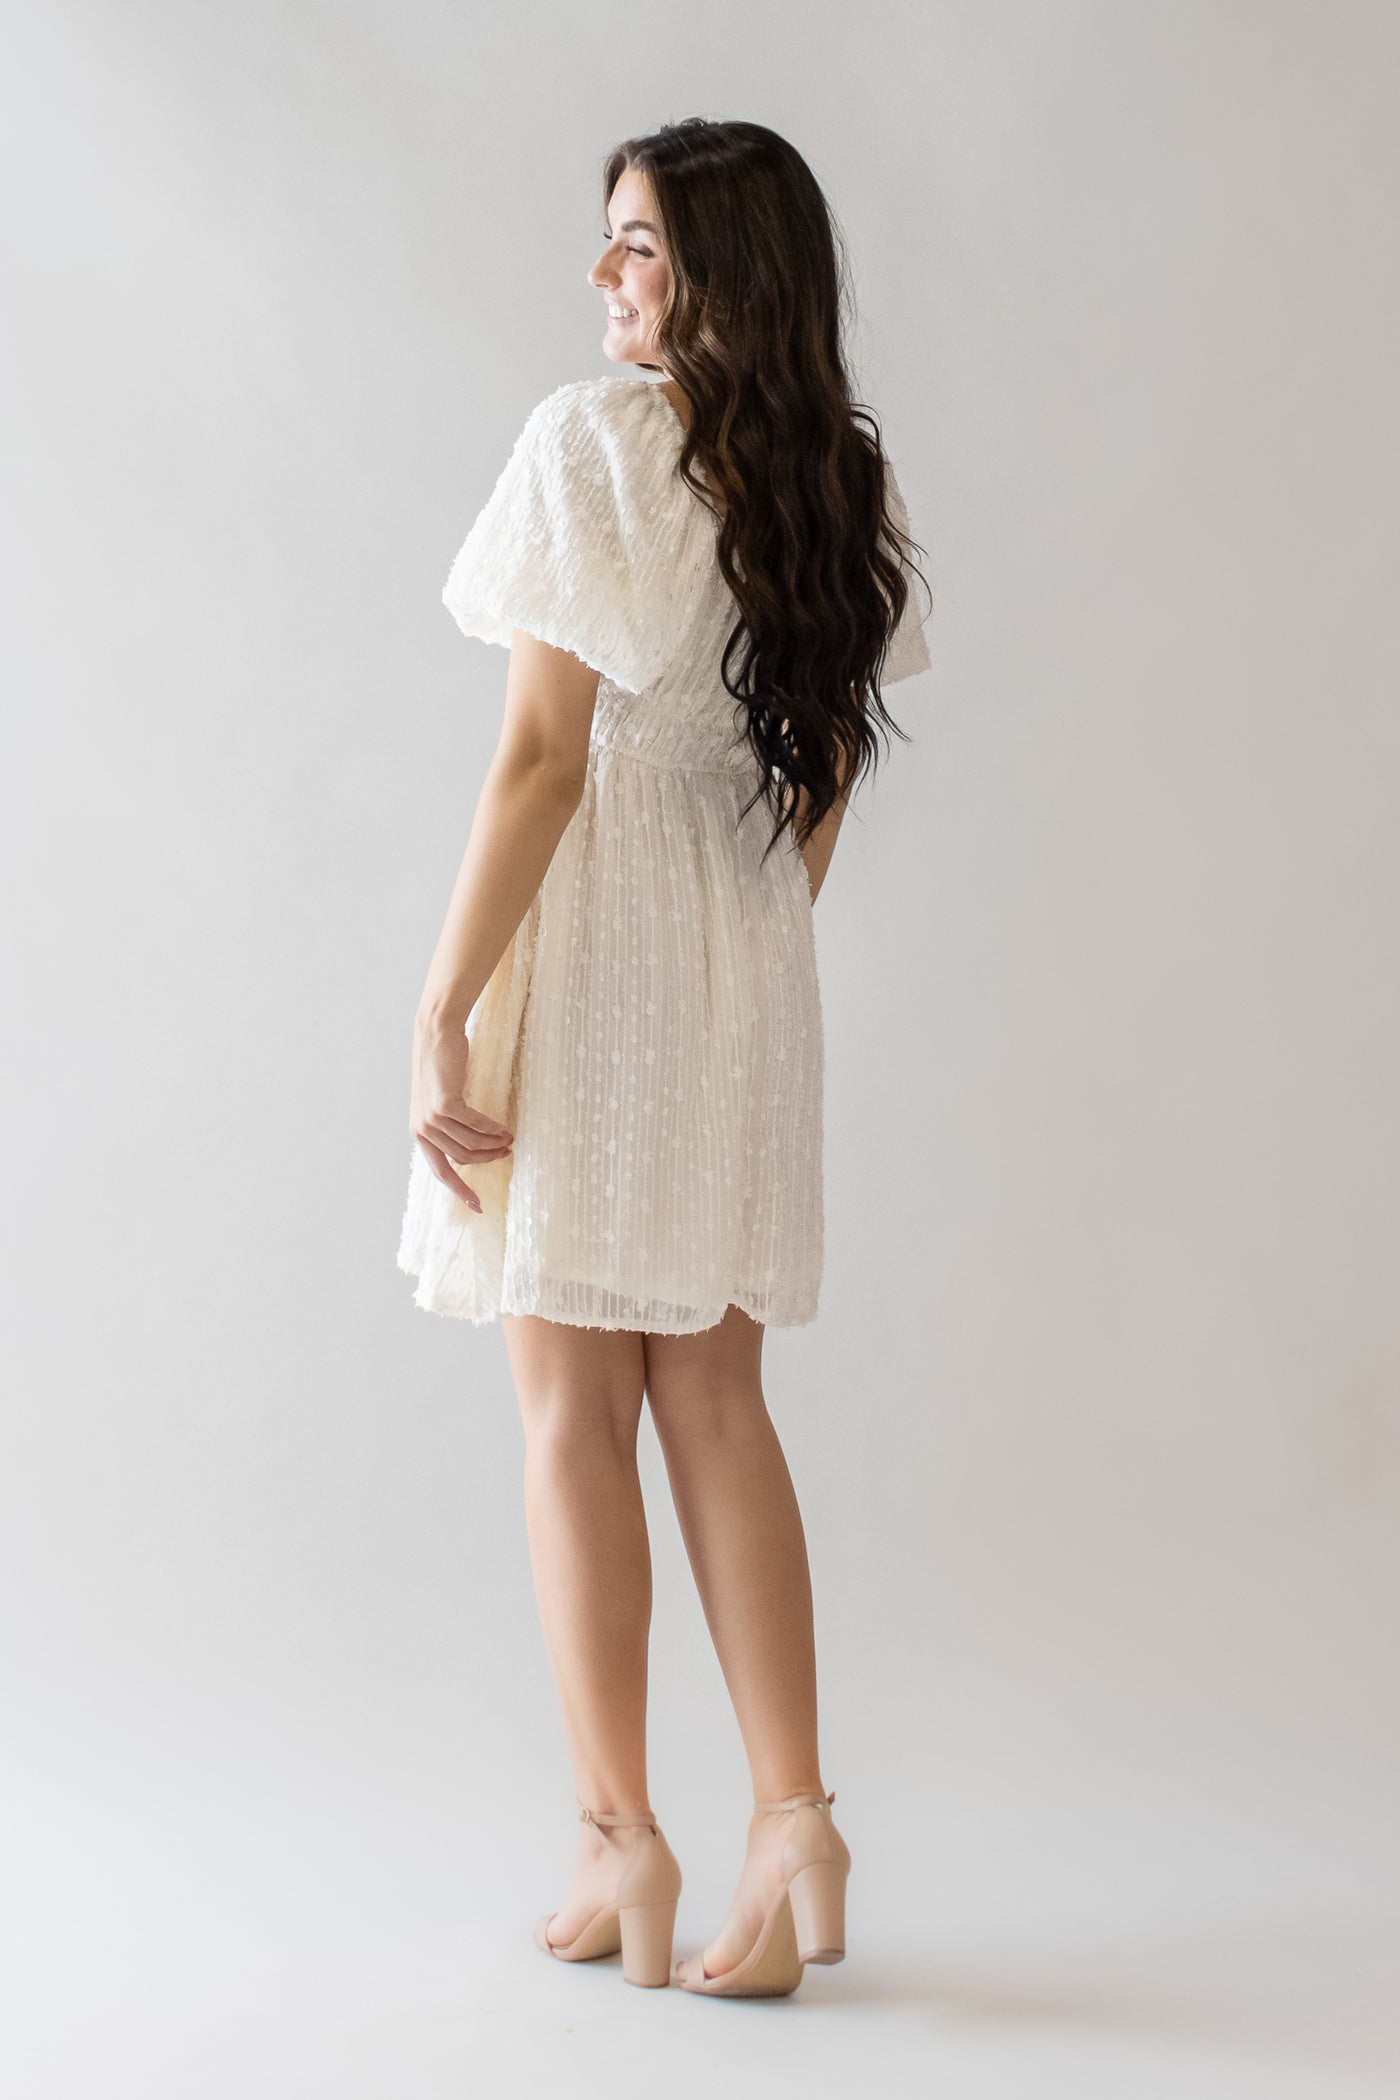 This modest dress features a puff sleeve and cream color perfect for a getaway dress